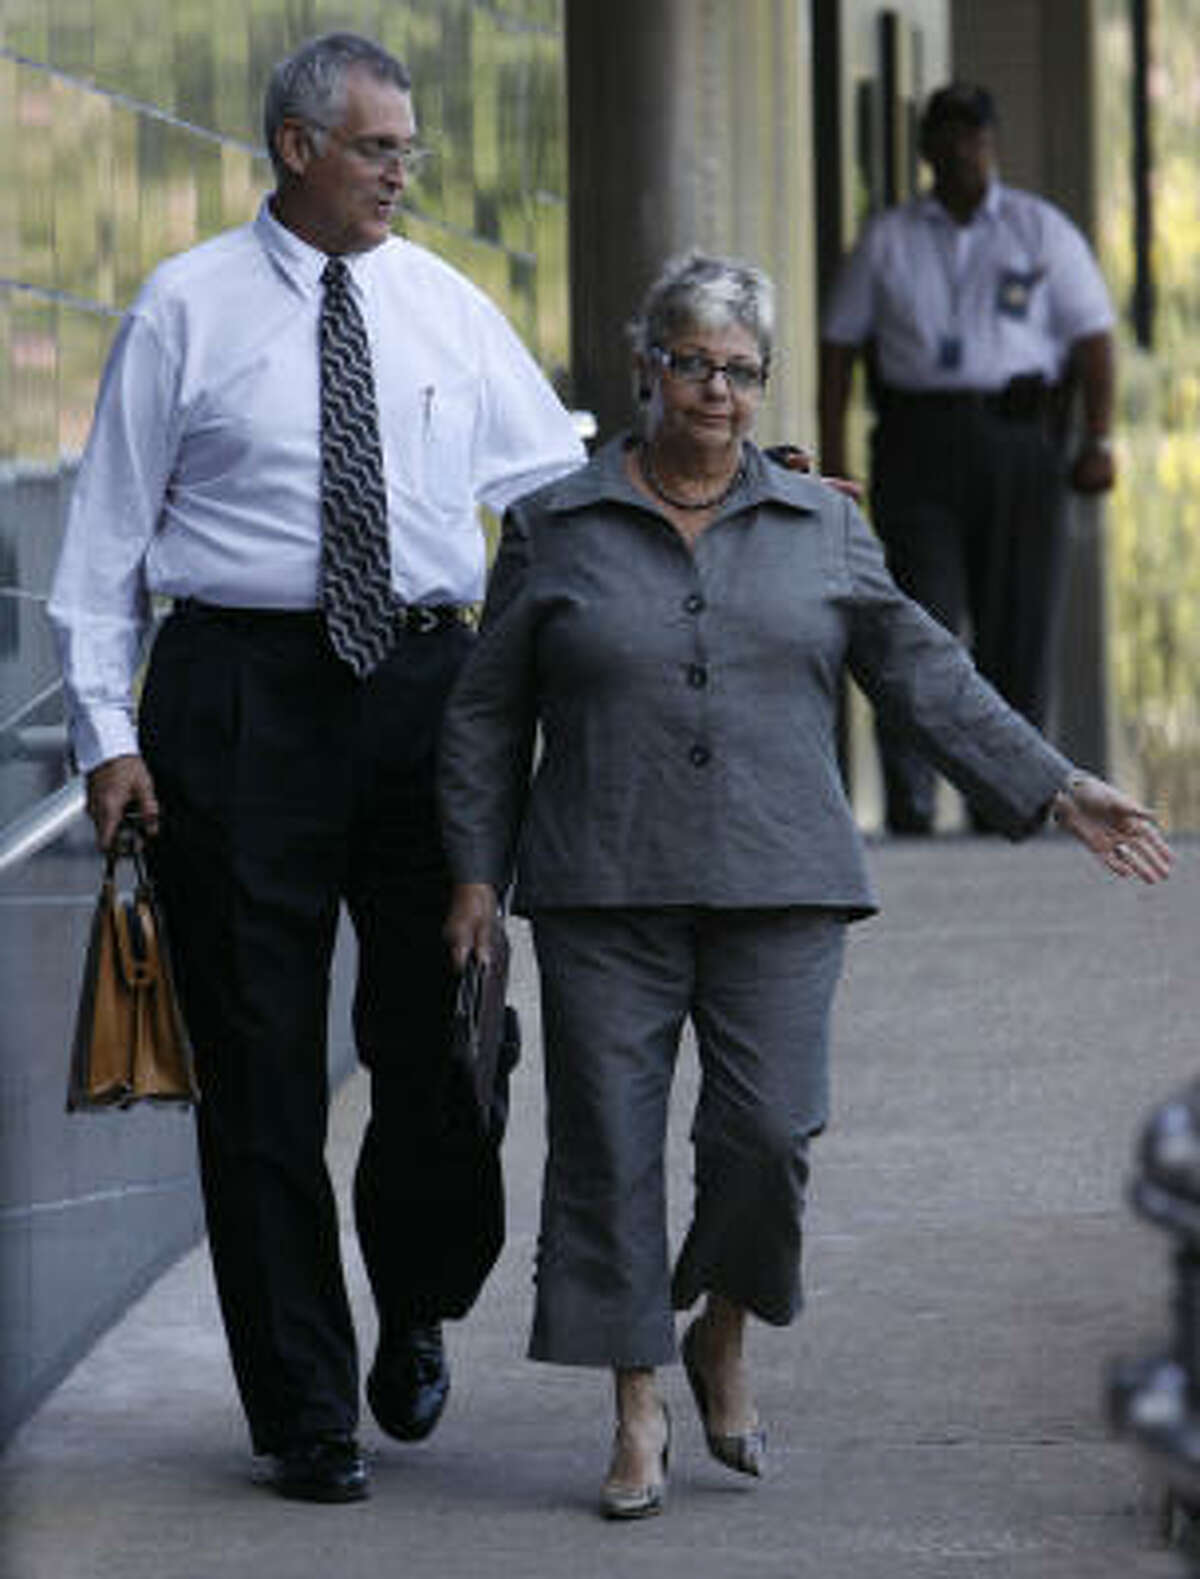 U.S. District Judge Samuel Kent walks out of the Bob Casey Federal Courthouse with his wife, Sarah, on Sept. 3. Kent is scheduled to be arraigned on the new charges Wednesday morning. His trial on the first sexual charges is set for Jan. 26 before U.S. Senior Judge Roger Vinson, of Florida, who is overseeing the case.